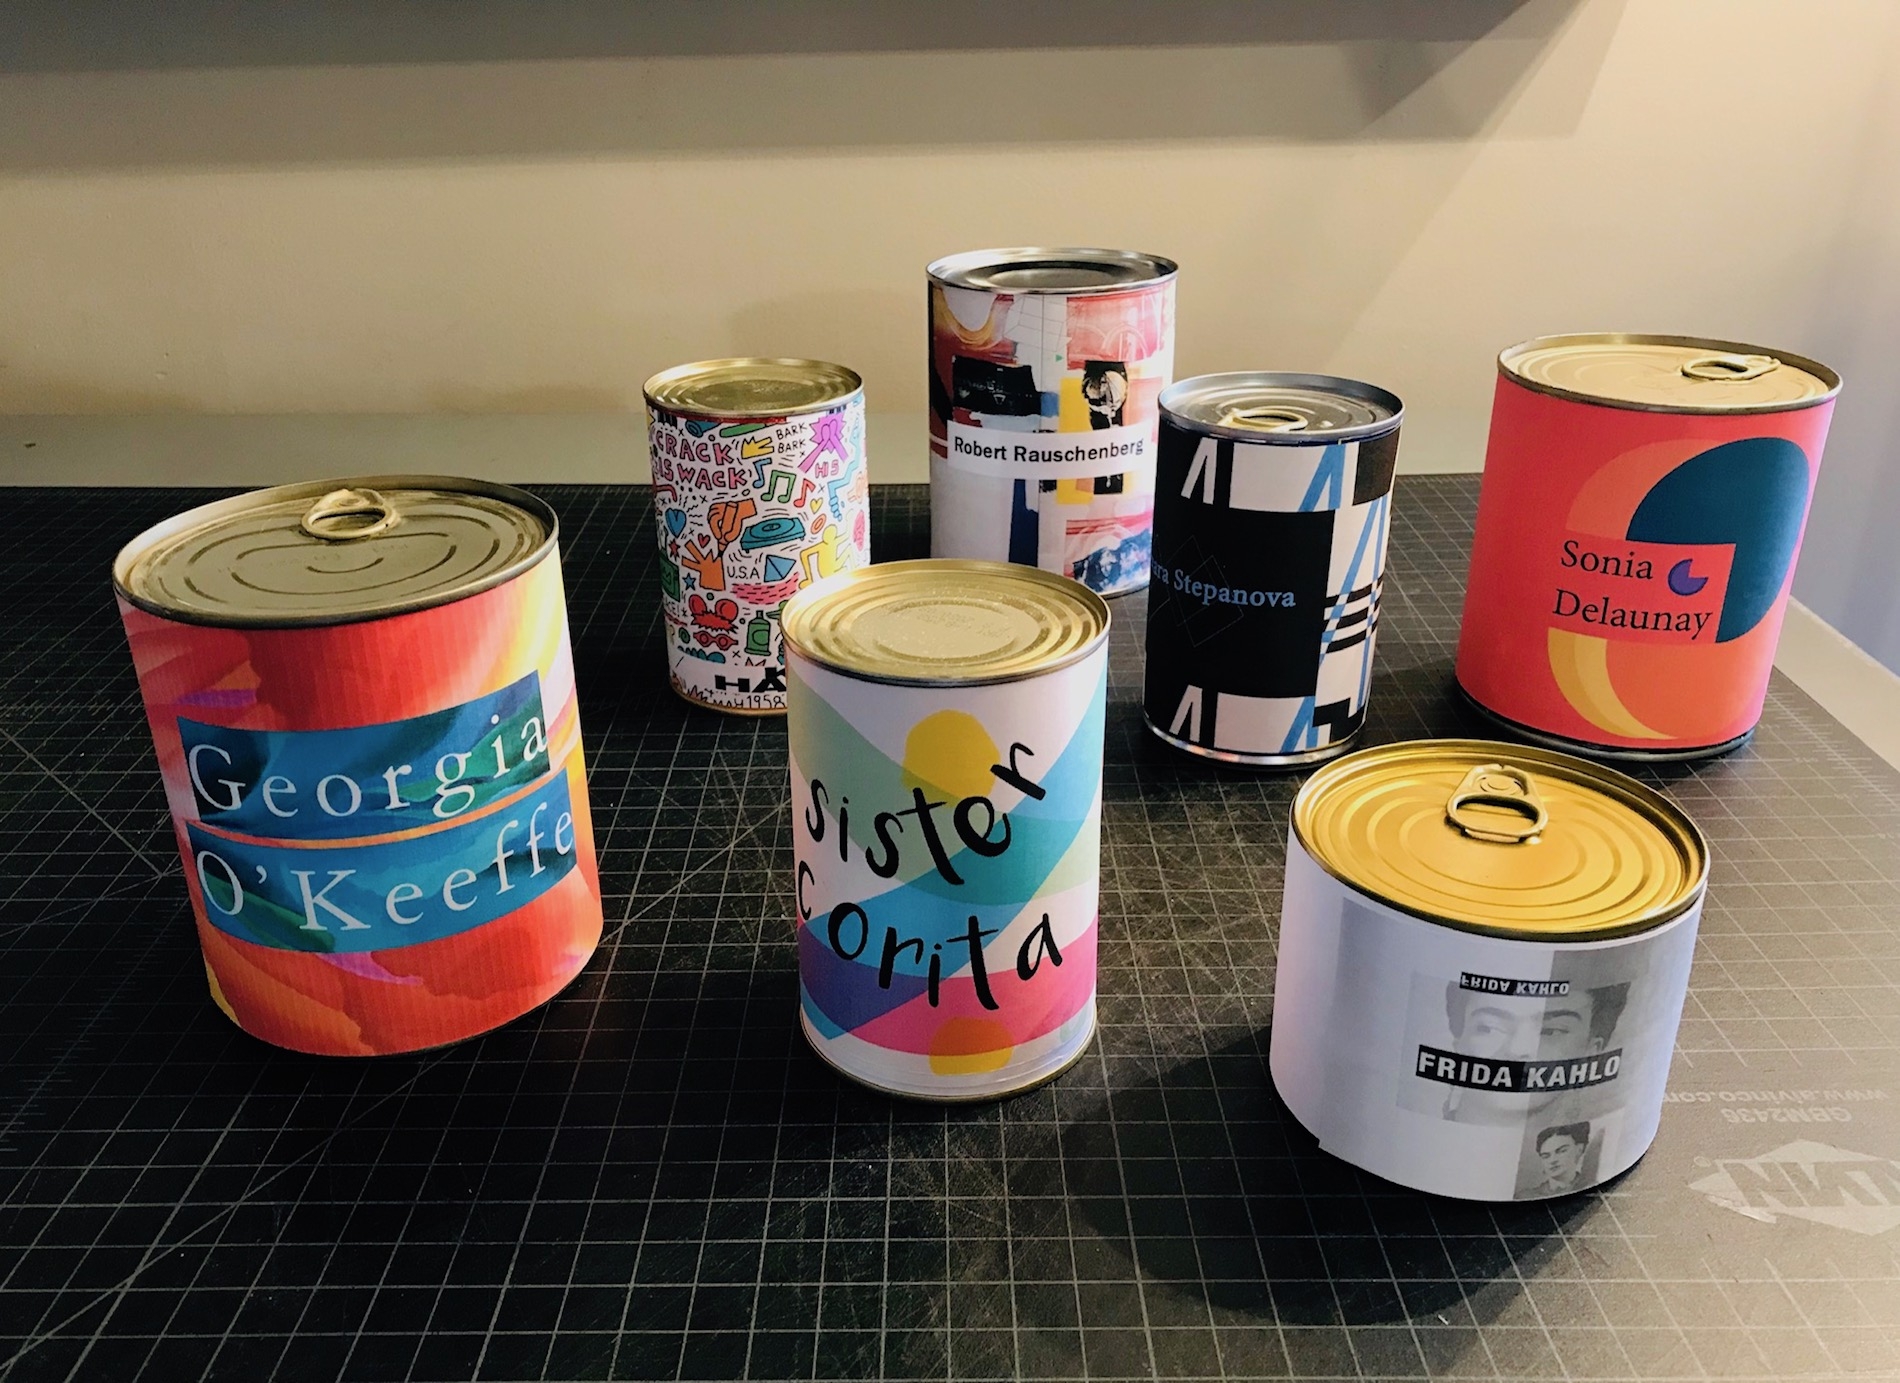 A photo of brightly colored cans devoted to different artists.